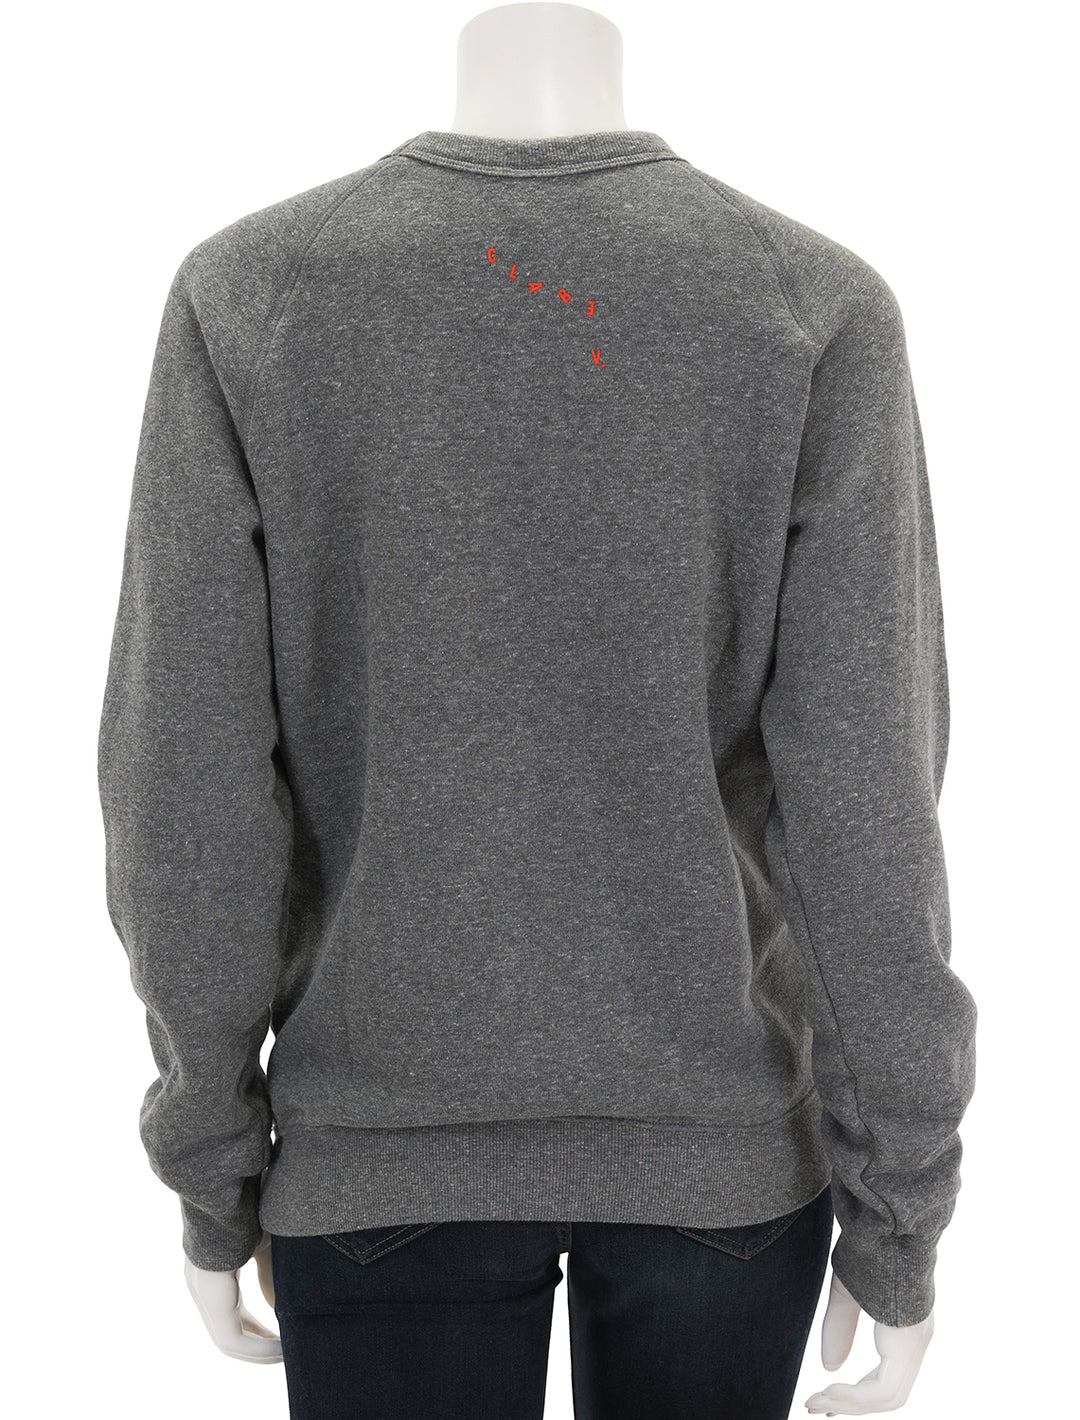 Back view of Clare V.'s oui sweatshirt in heather grey and poppy.